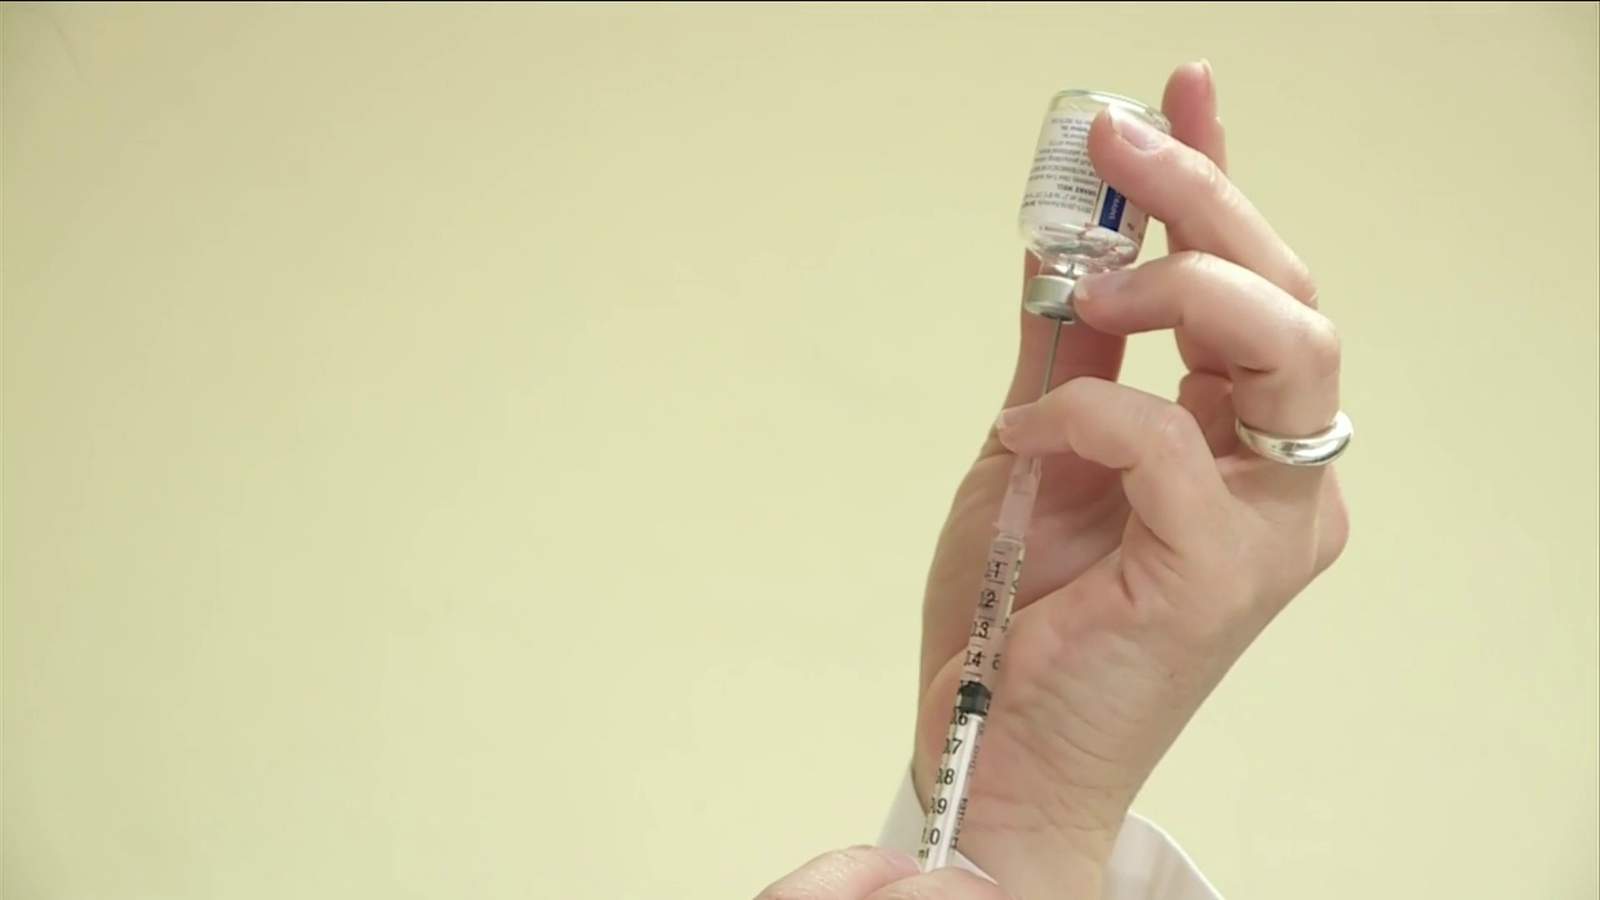 Doctor: ‘It is critically important to get the flu vaccine this year’